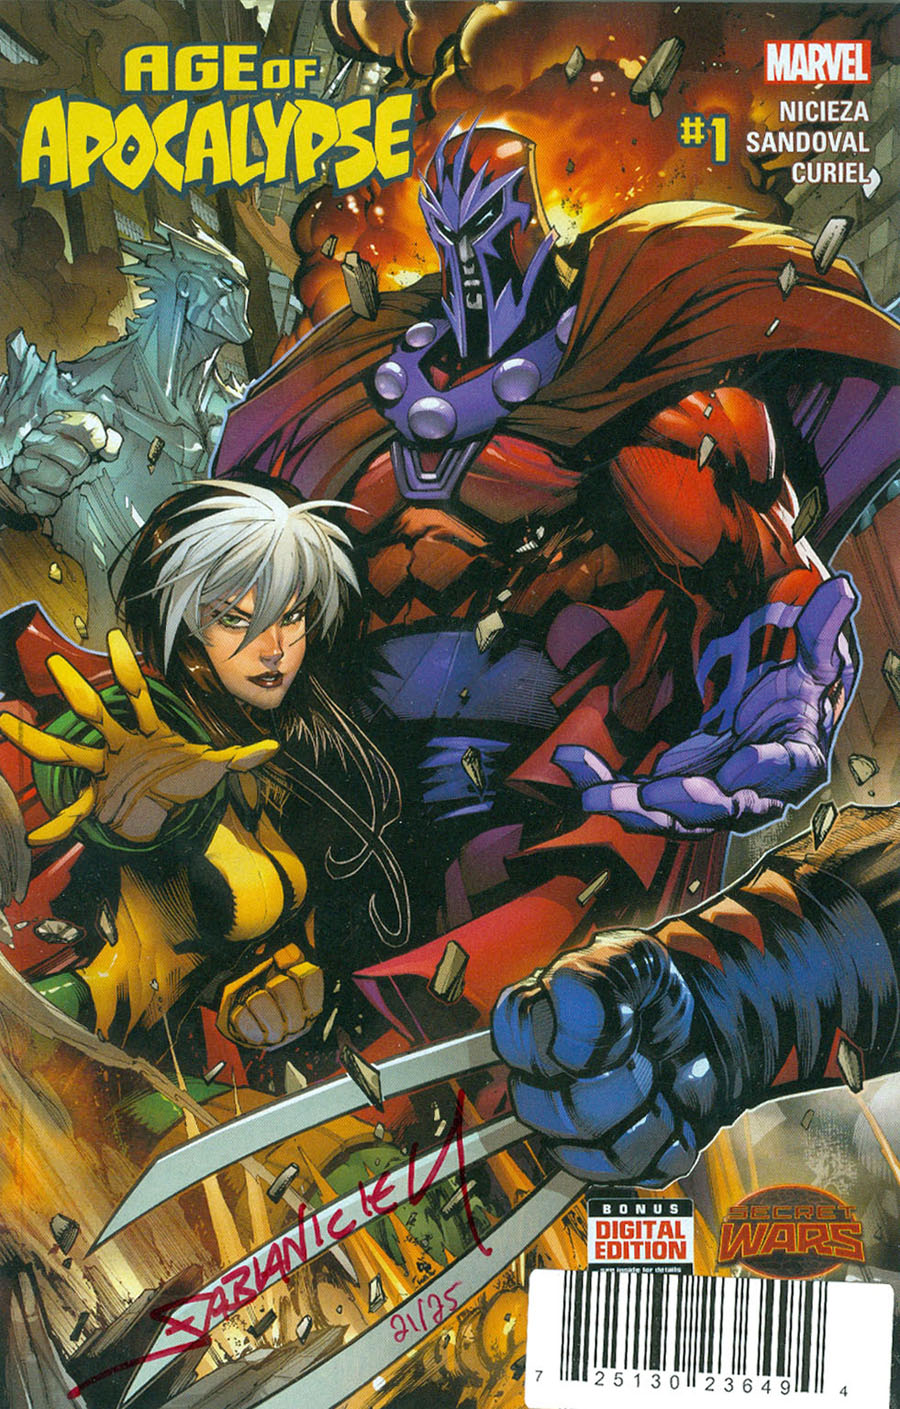 Age Of Apocalypse Vol 2 #1 Cover G DF Blood Red Signature Series Signed By Fabian Nicieza (Secret Wars Warzones Tie-In)